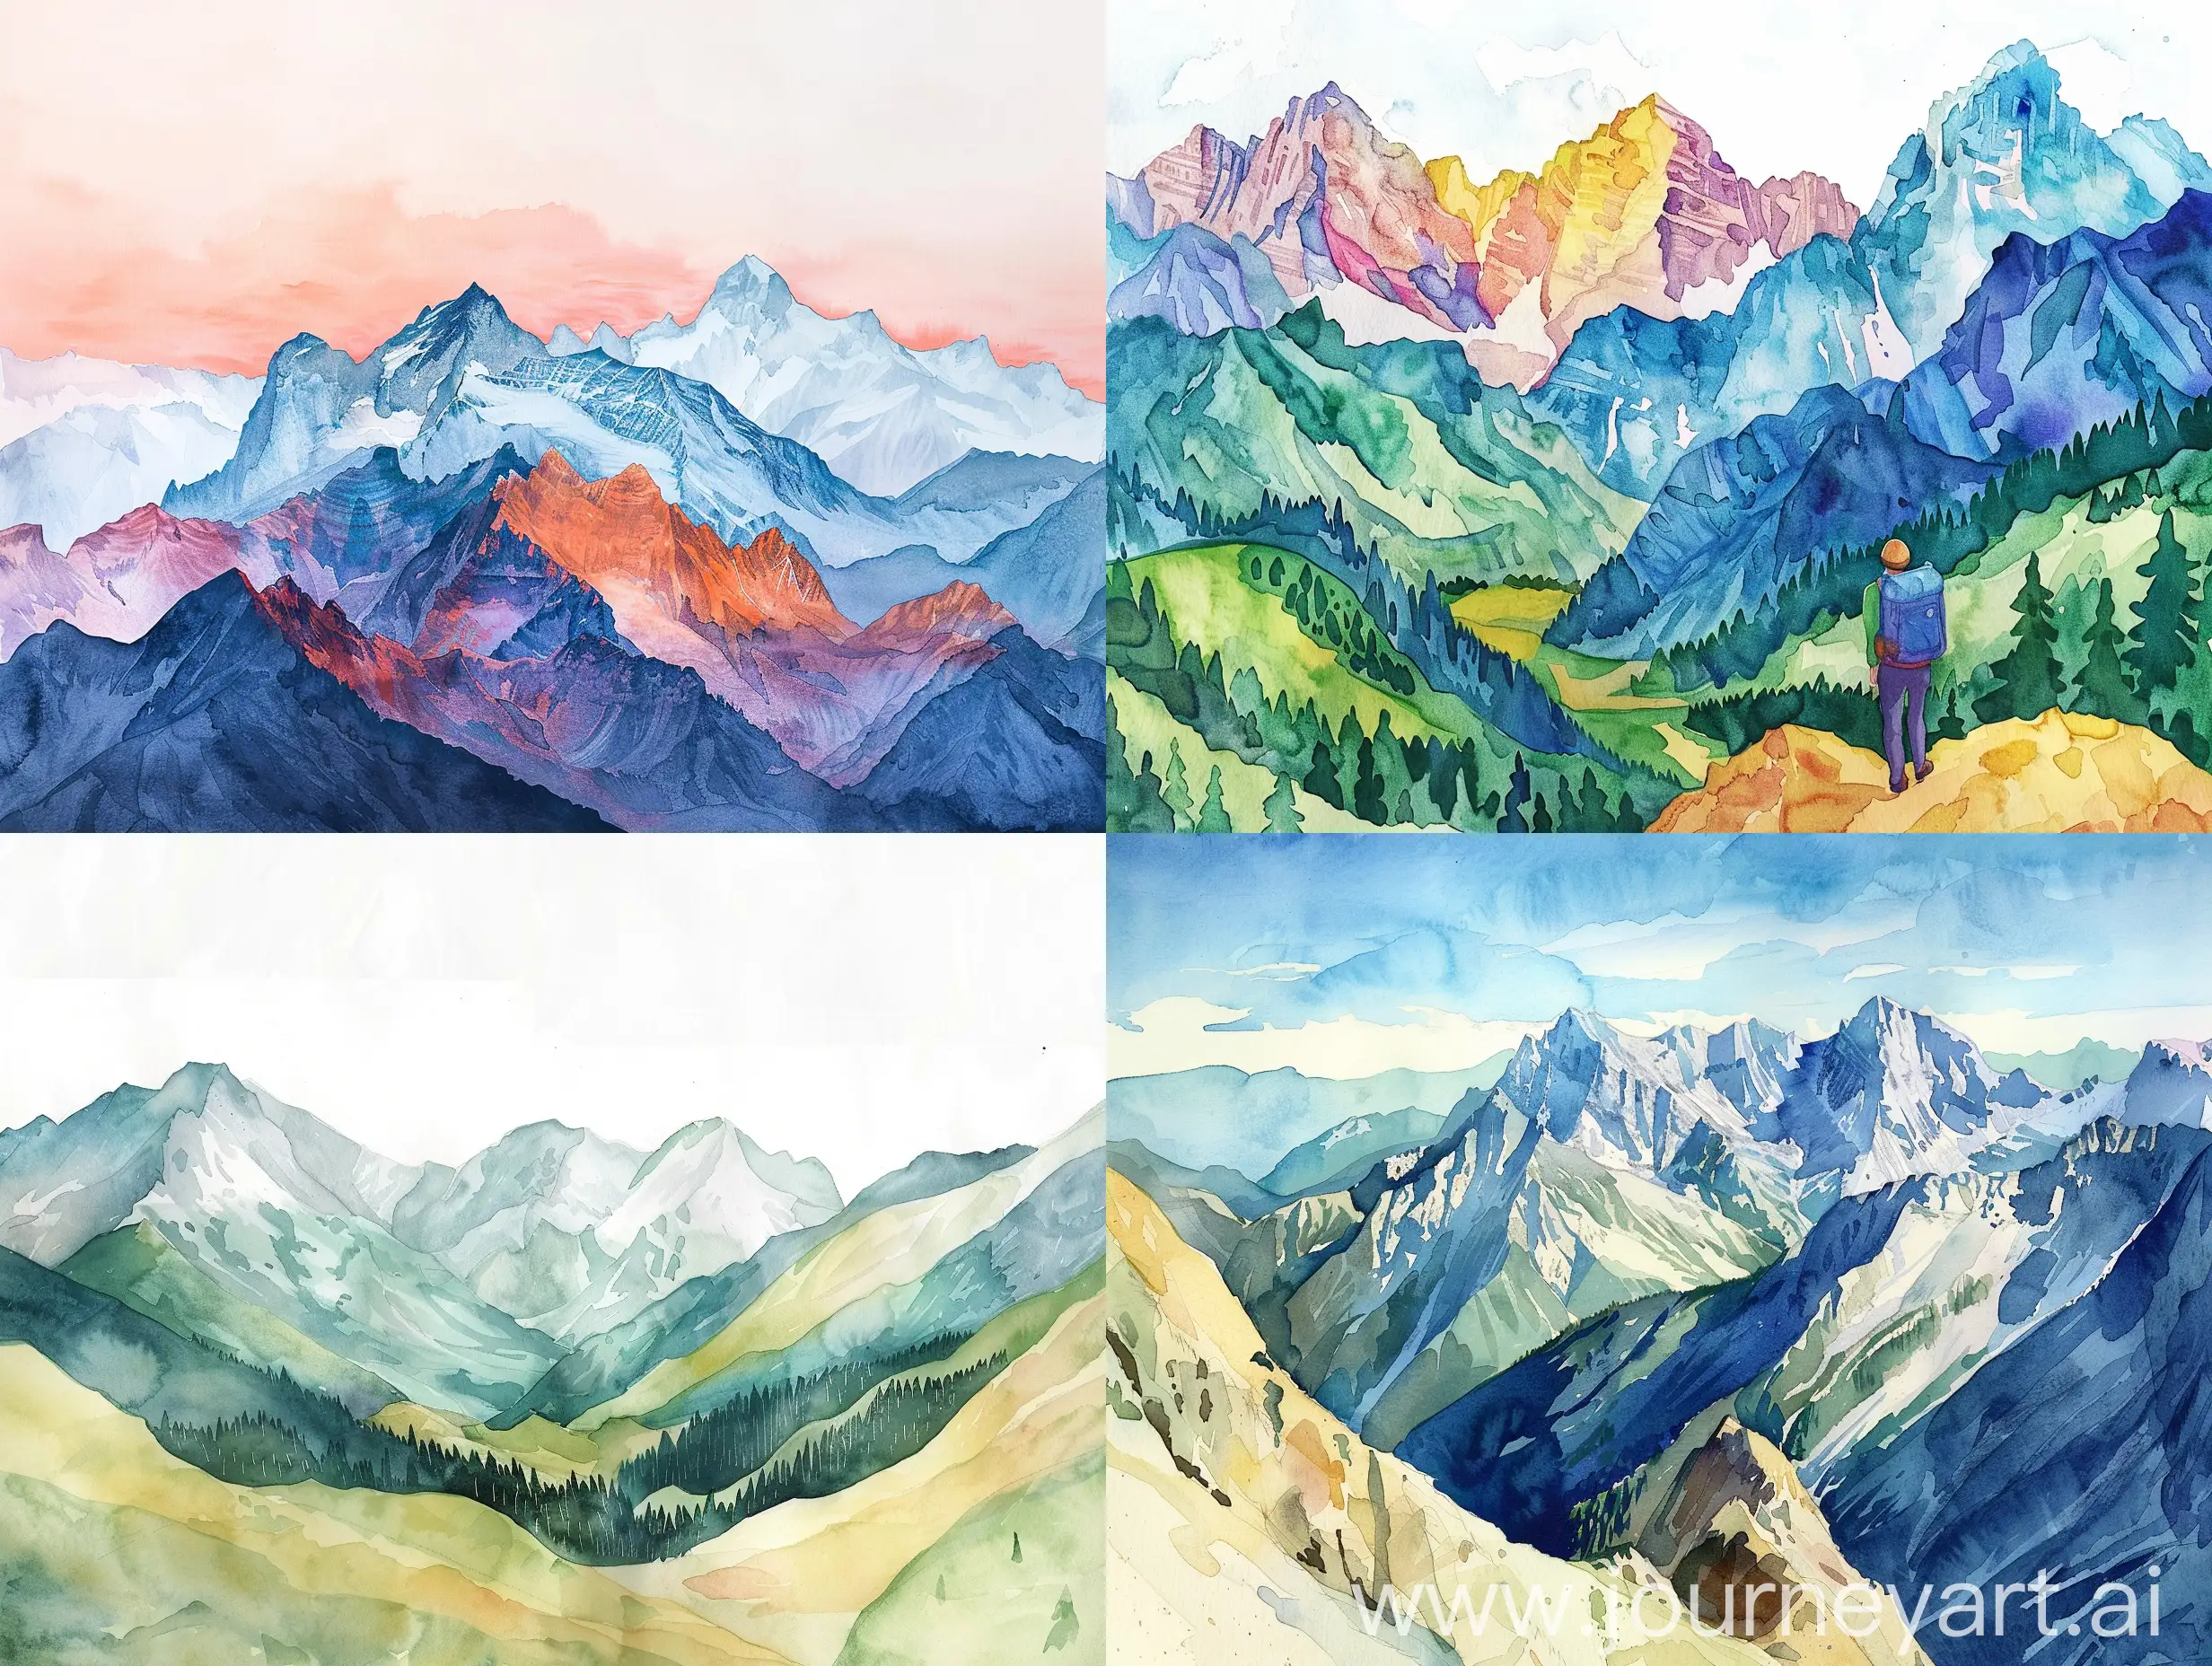 Summer-Trekking-in-the-Mountains-Watercolor-Lowbrow-Surrealism